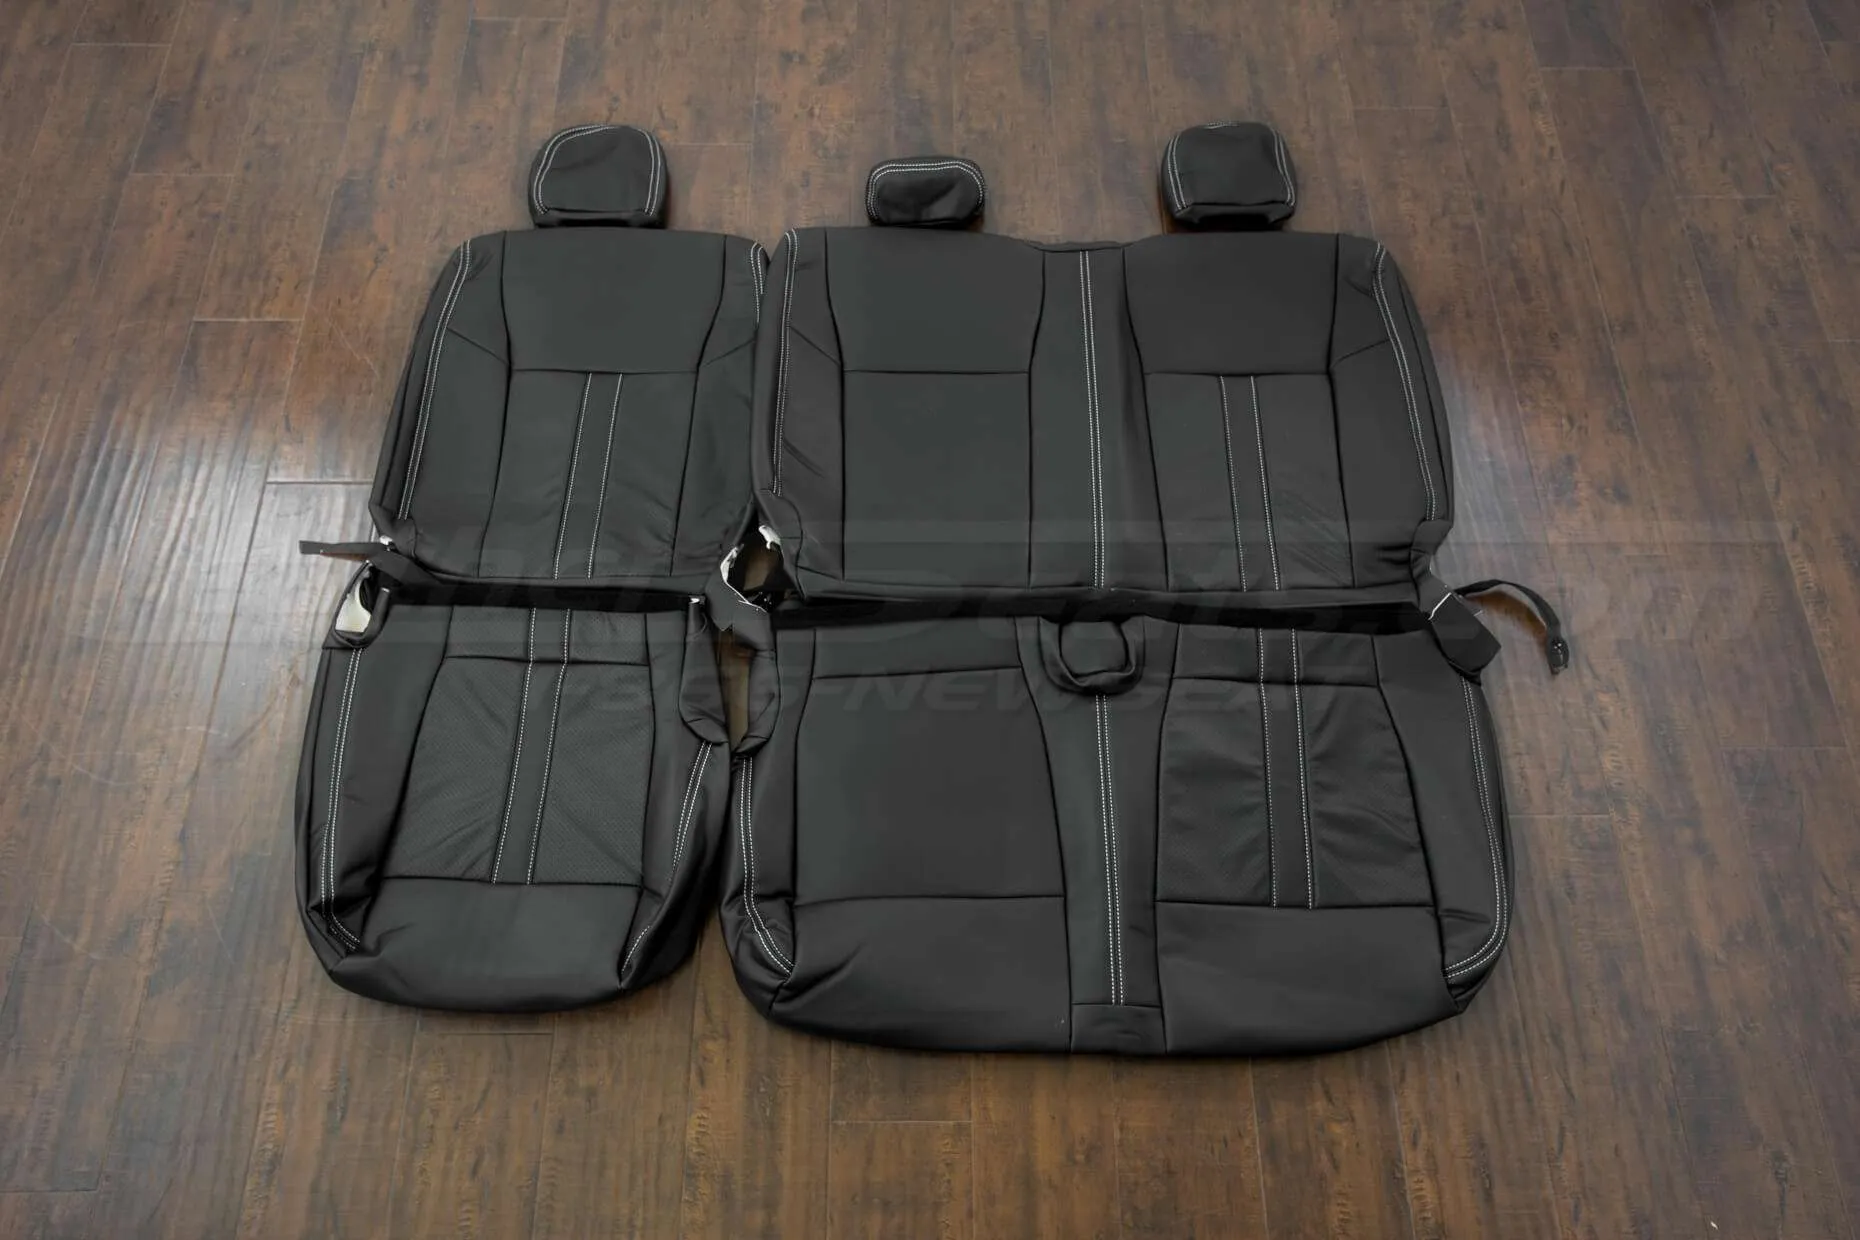 Ford F-150 Upholstery Kit - Black - Rear seats